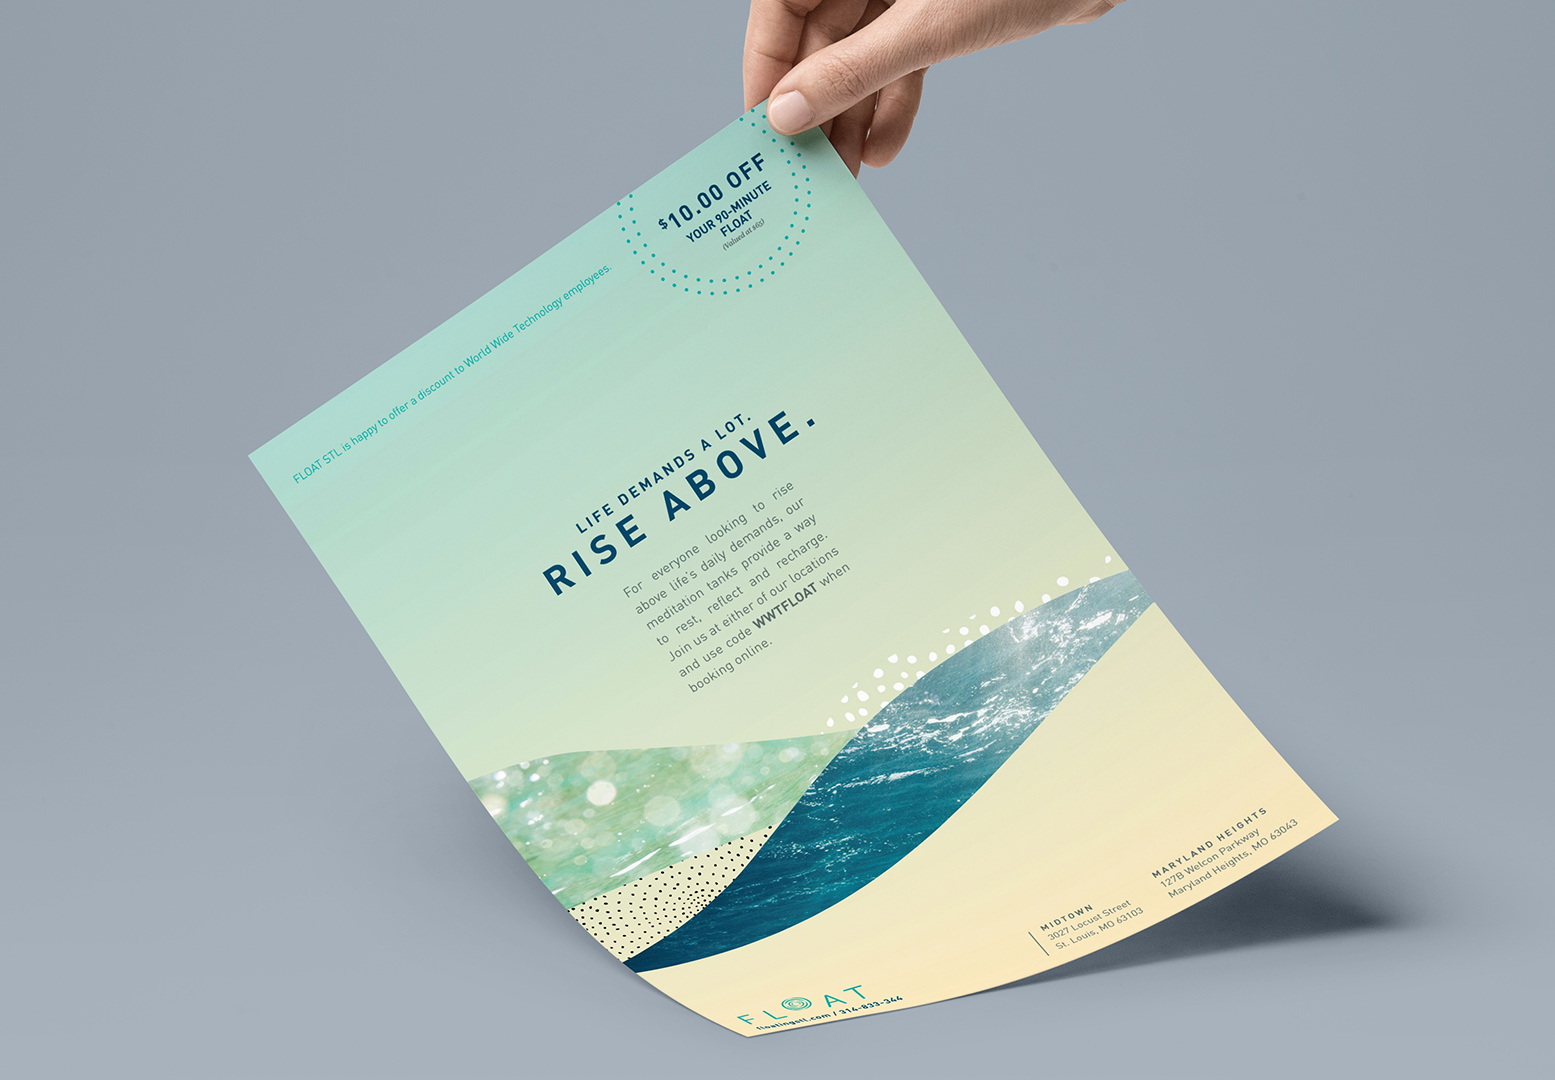 Person holding marketing sheets for FLOAT STL designed as part of their brand identity